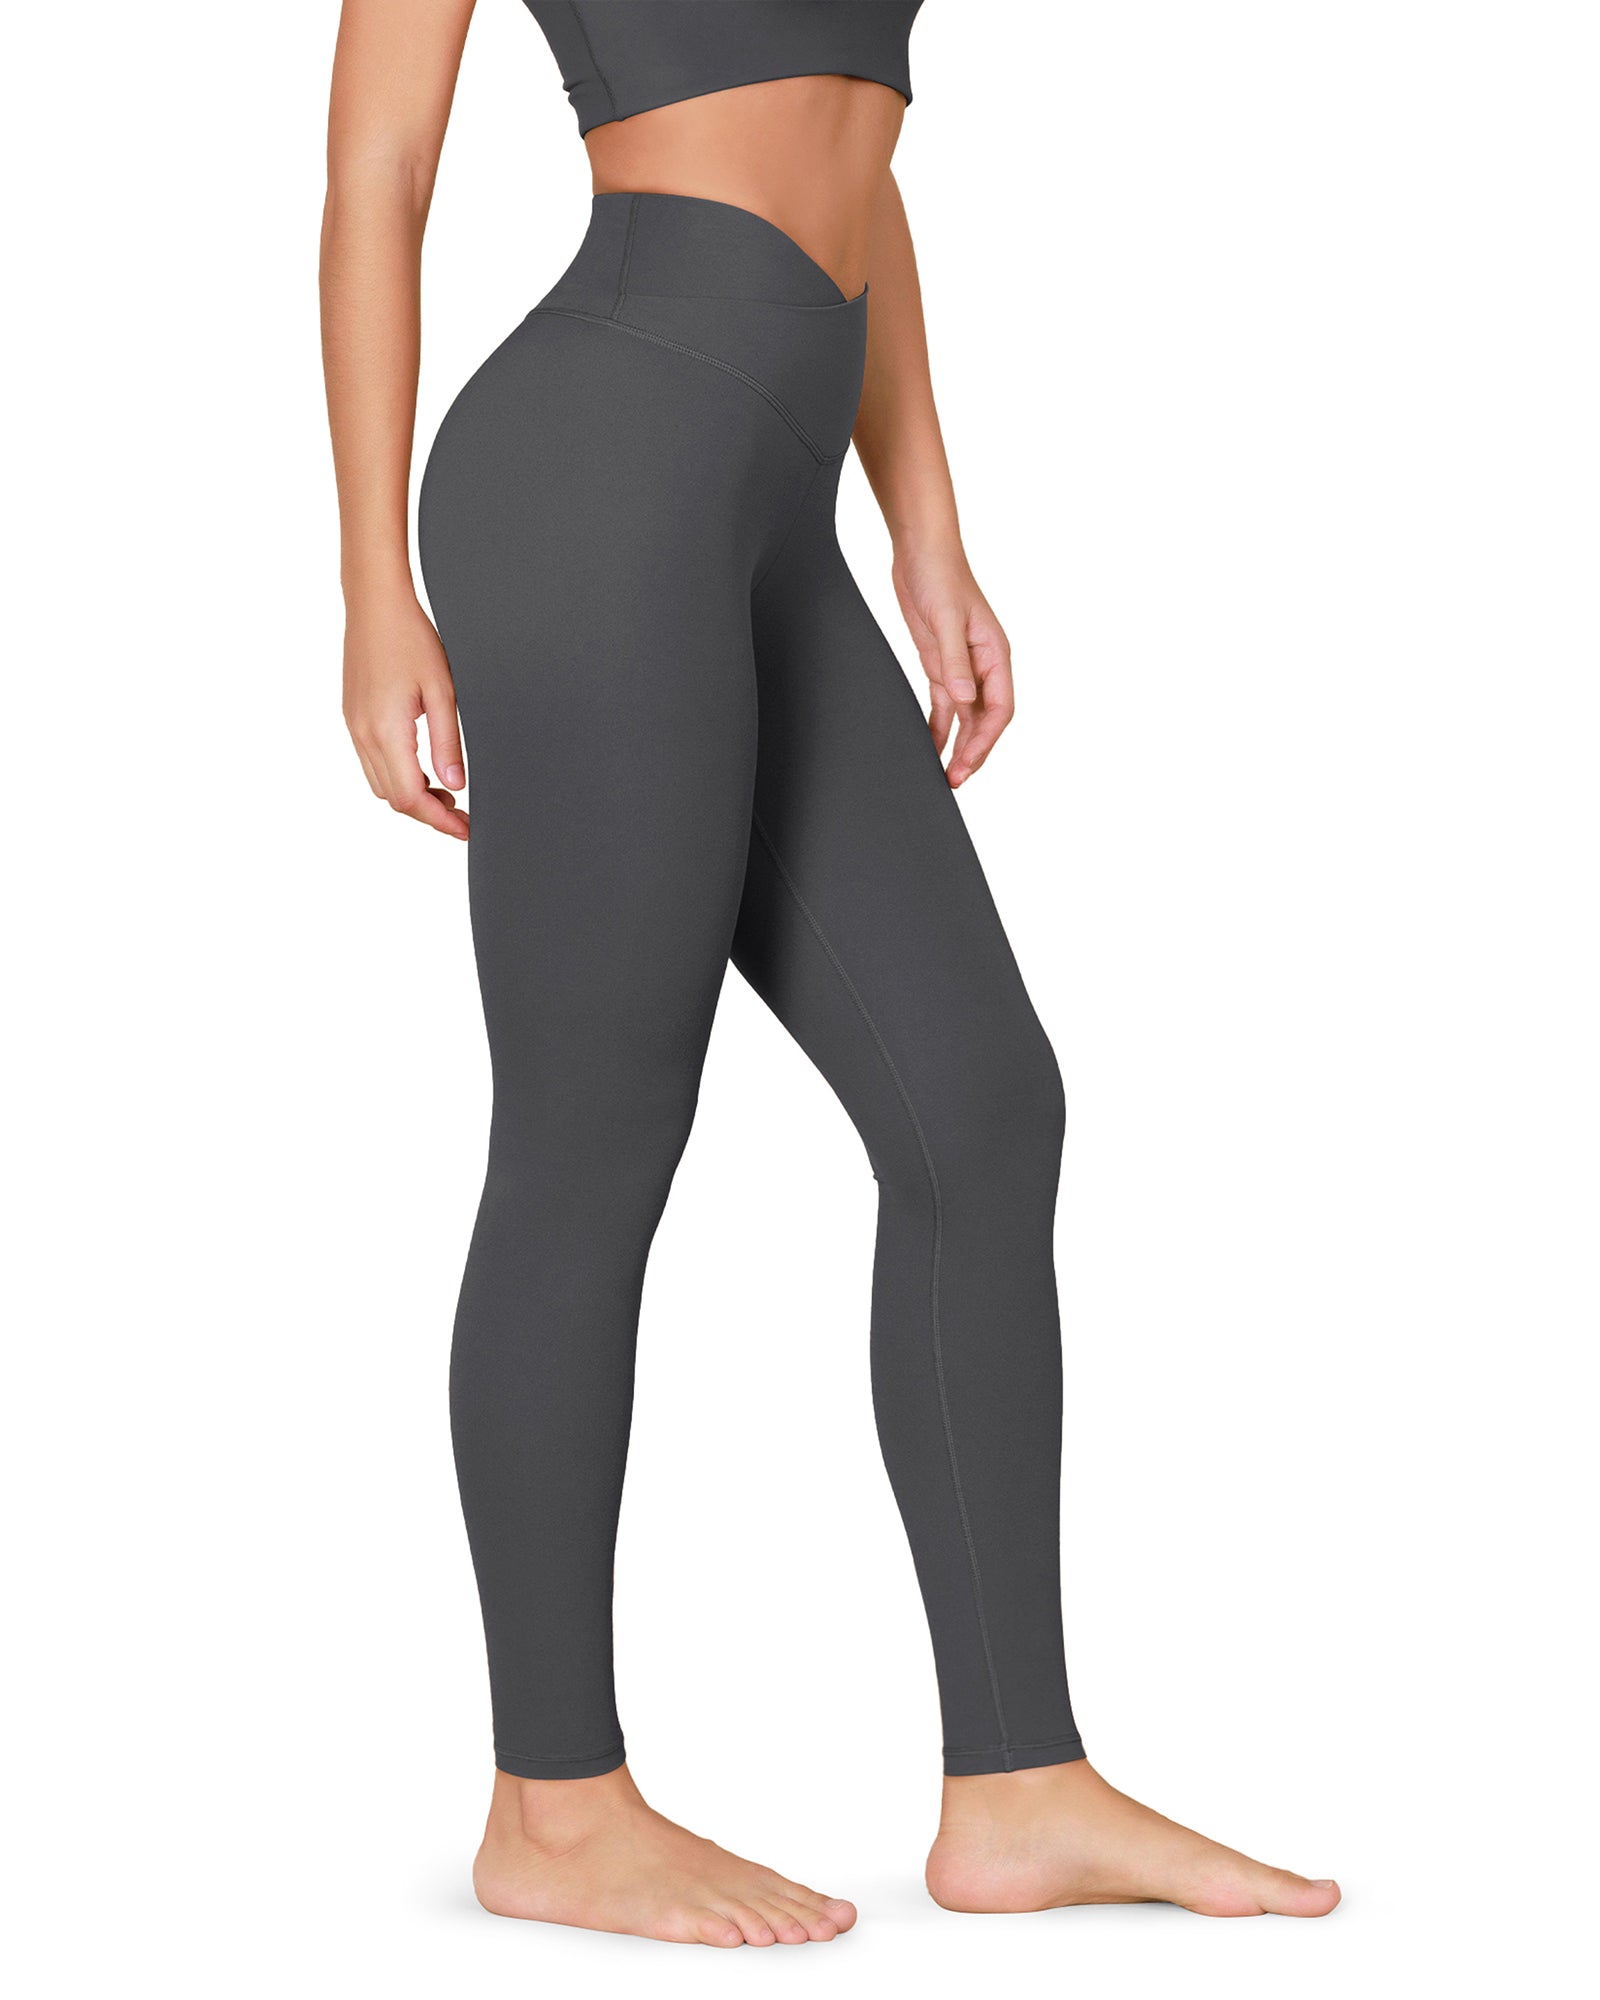 ODCLOUD Crossover 28" Leggings with Back Pocket - Classic Colors - ododos